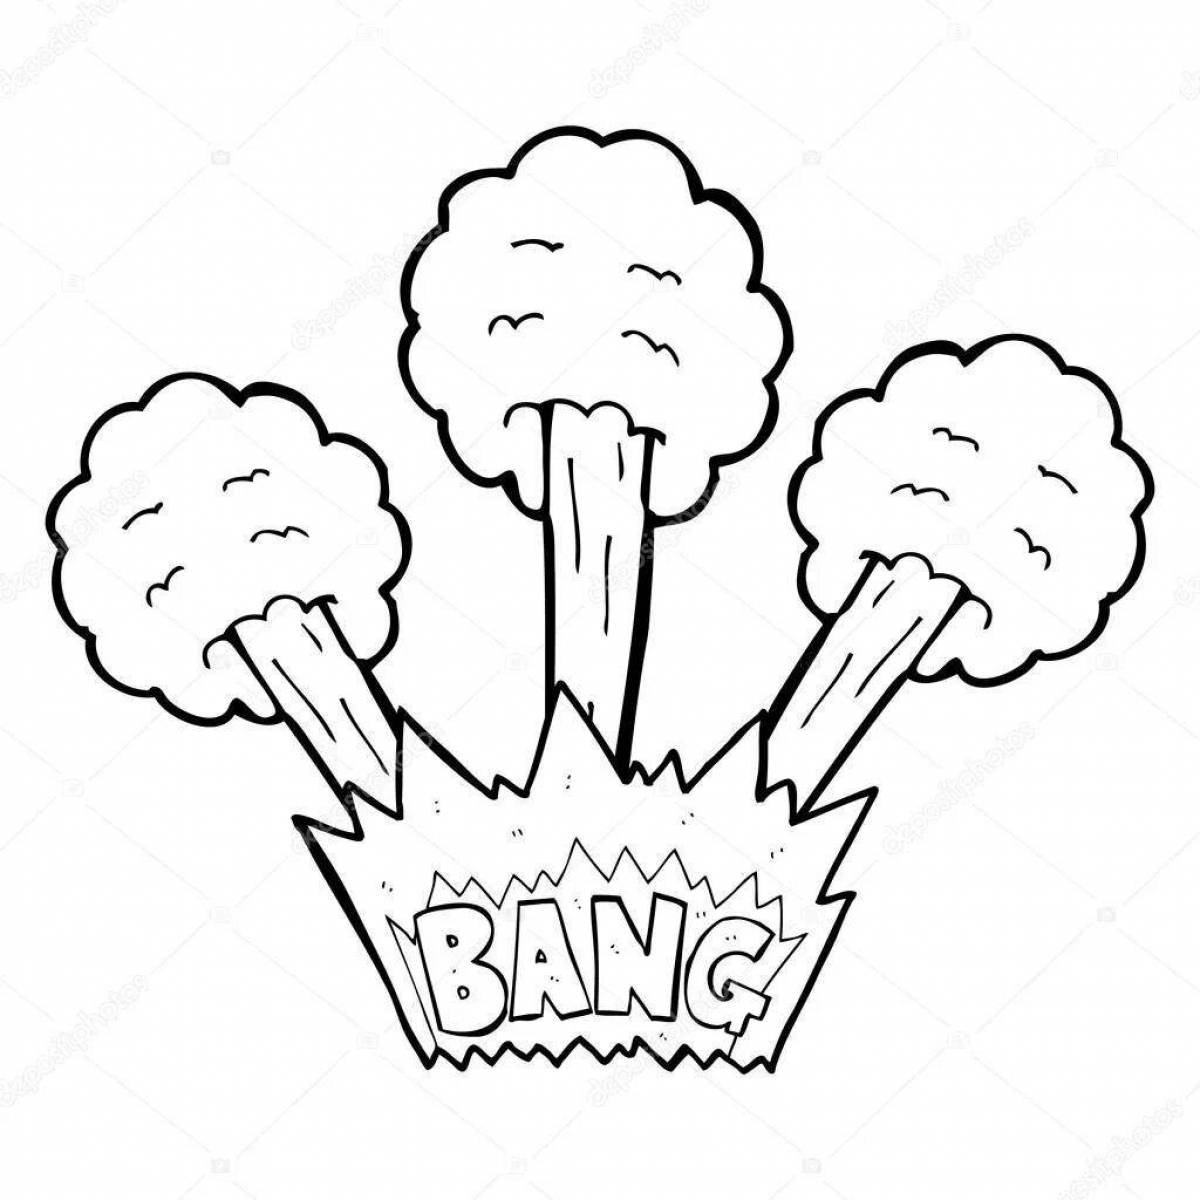 Large nuclear explosion coloring page